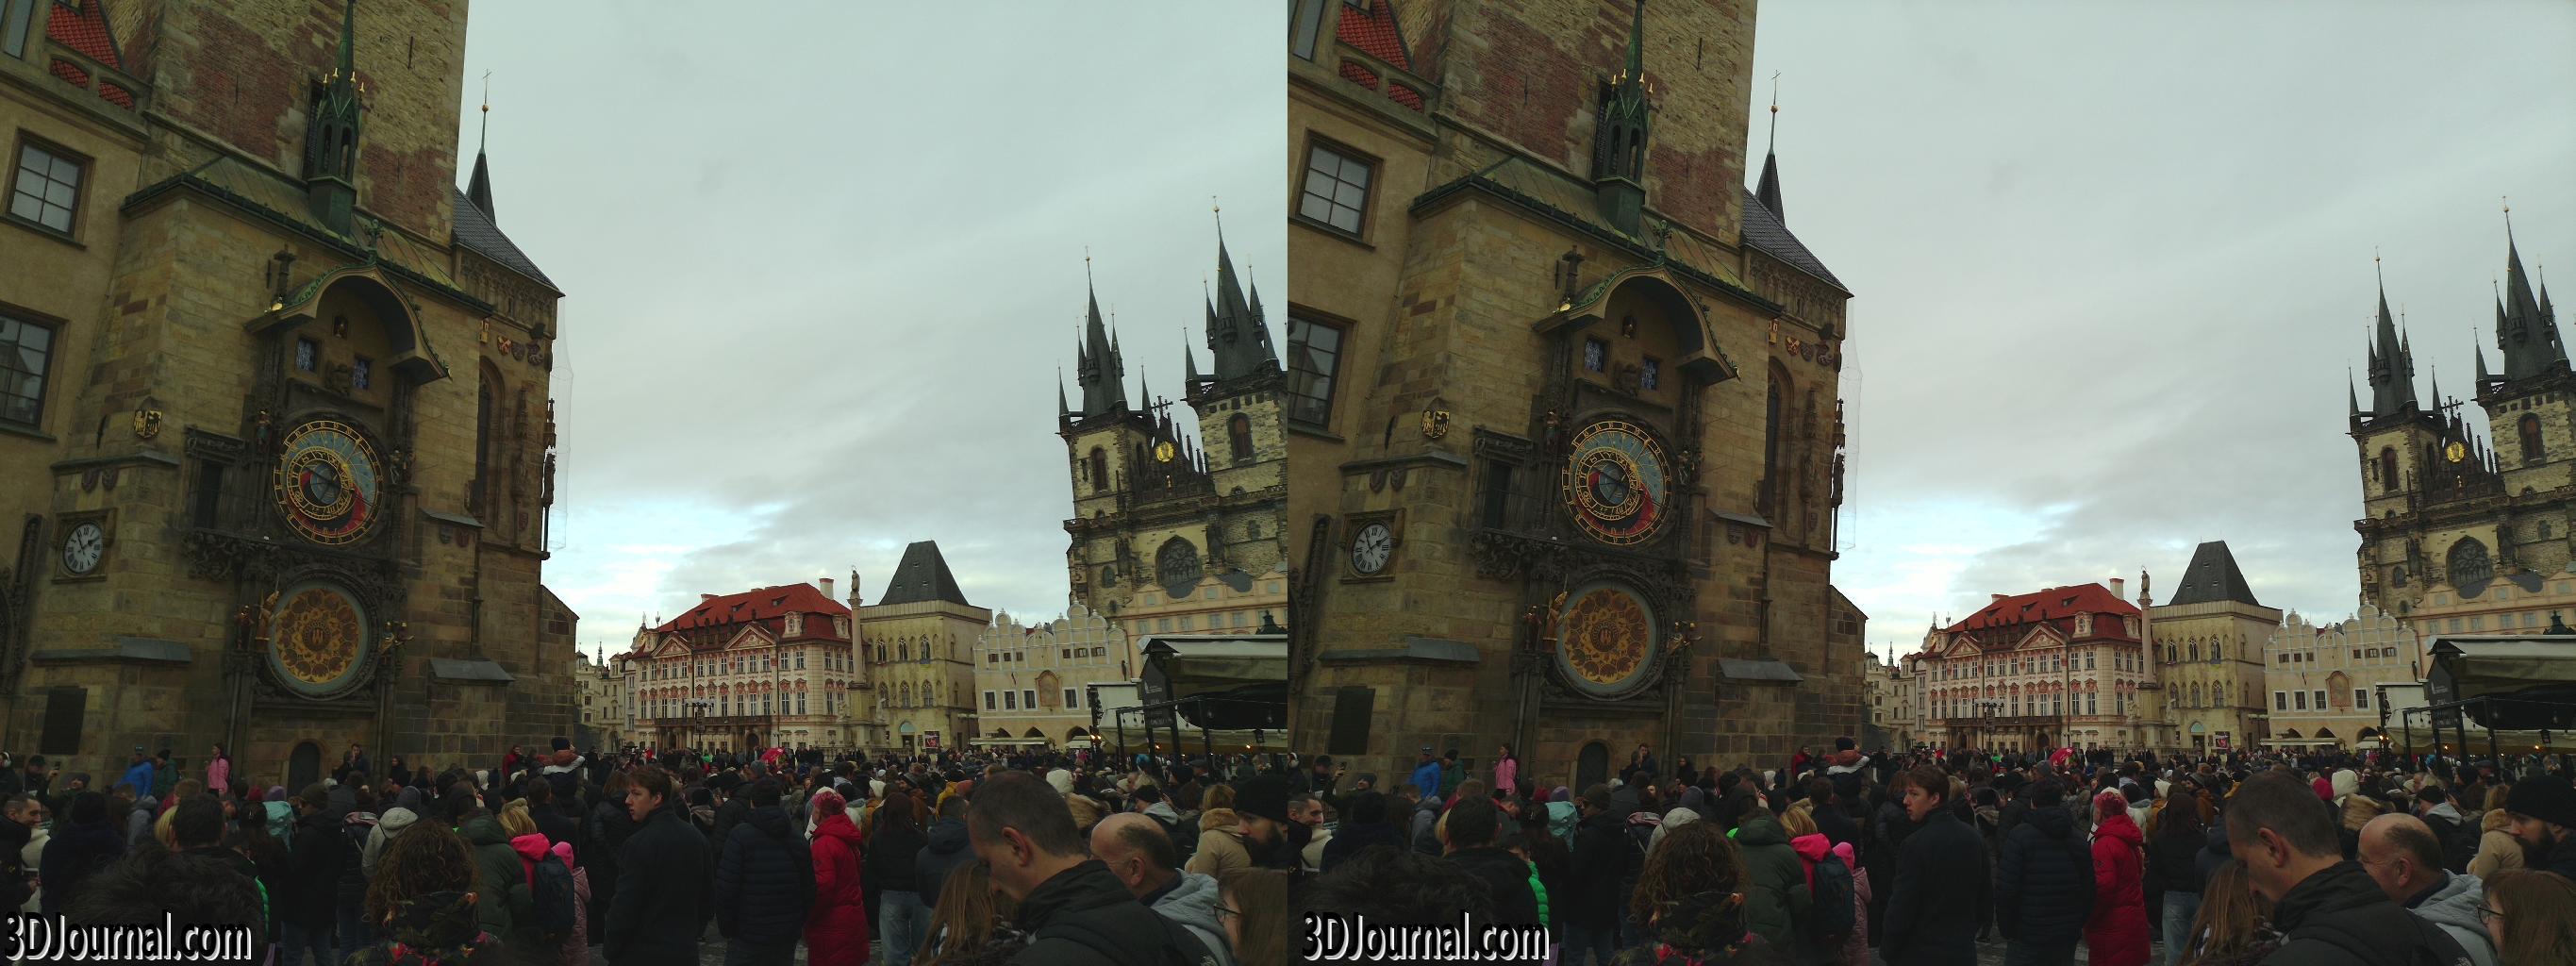 Old Town Square in Prague - by the Astronomical Clock